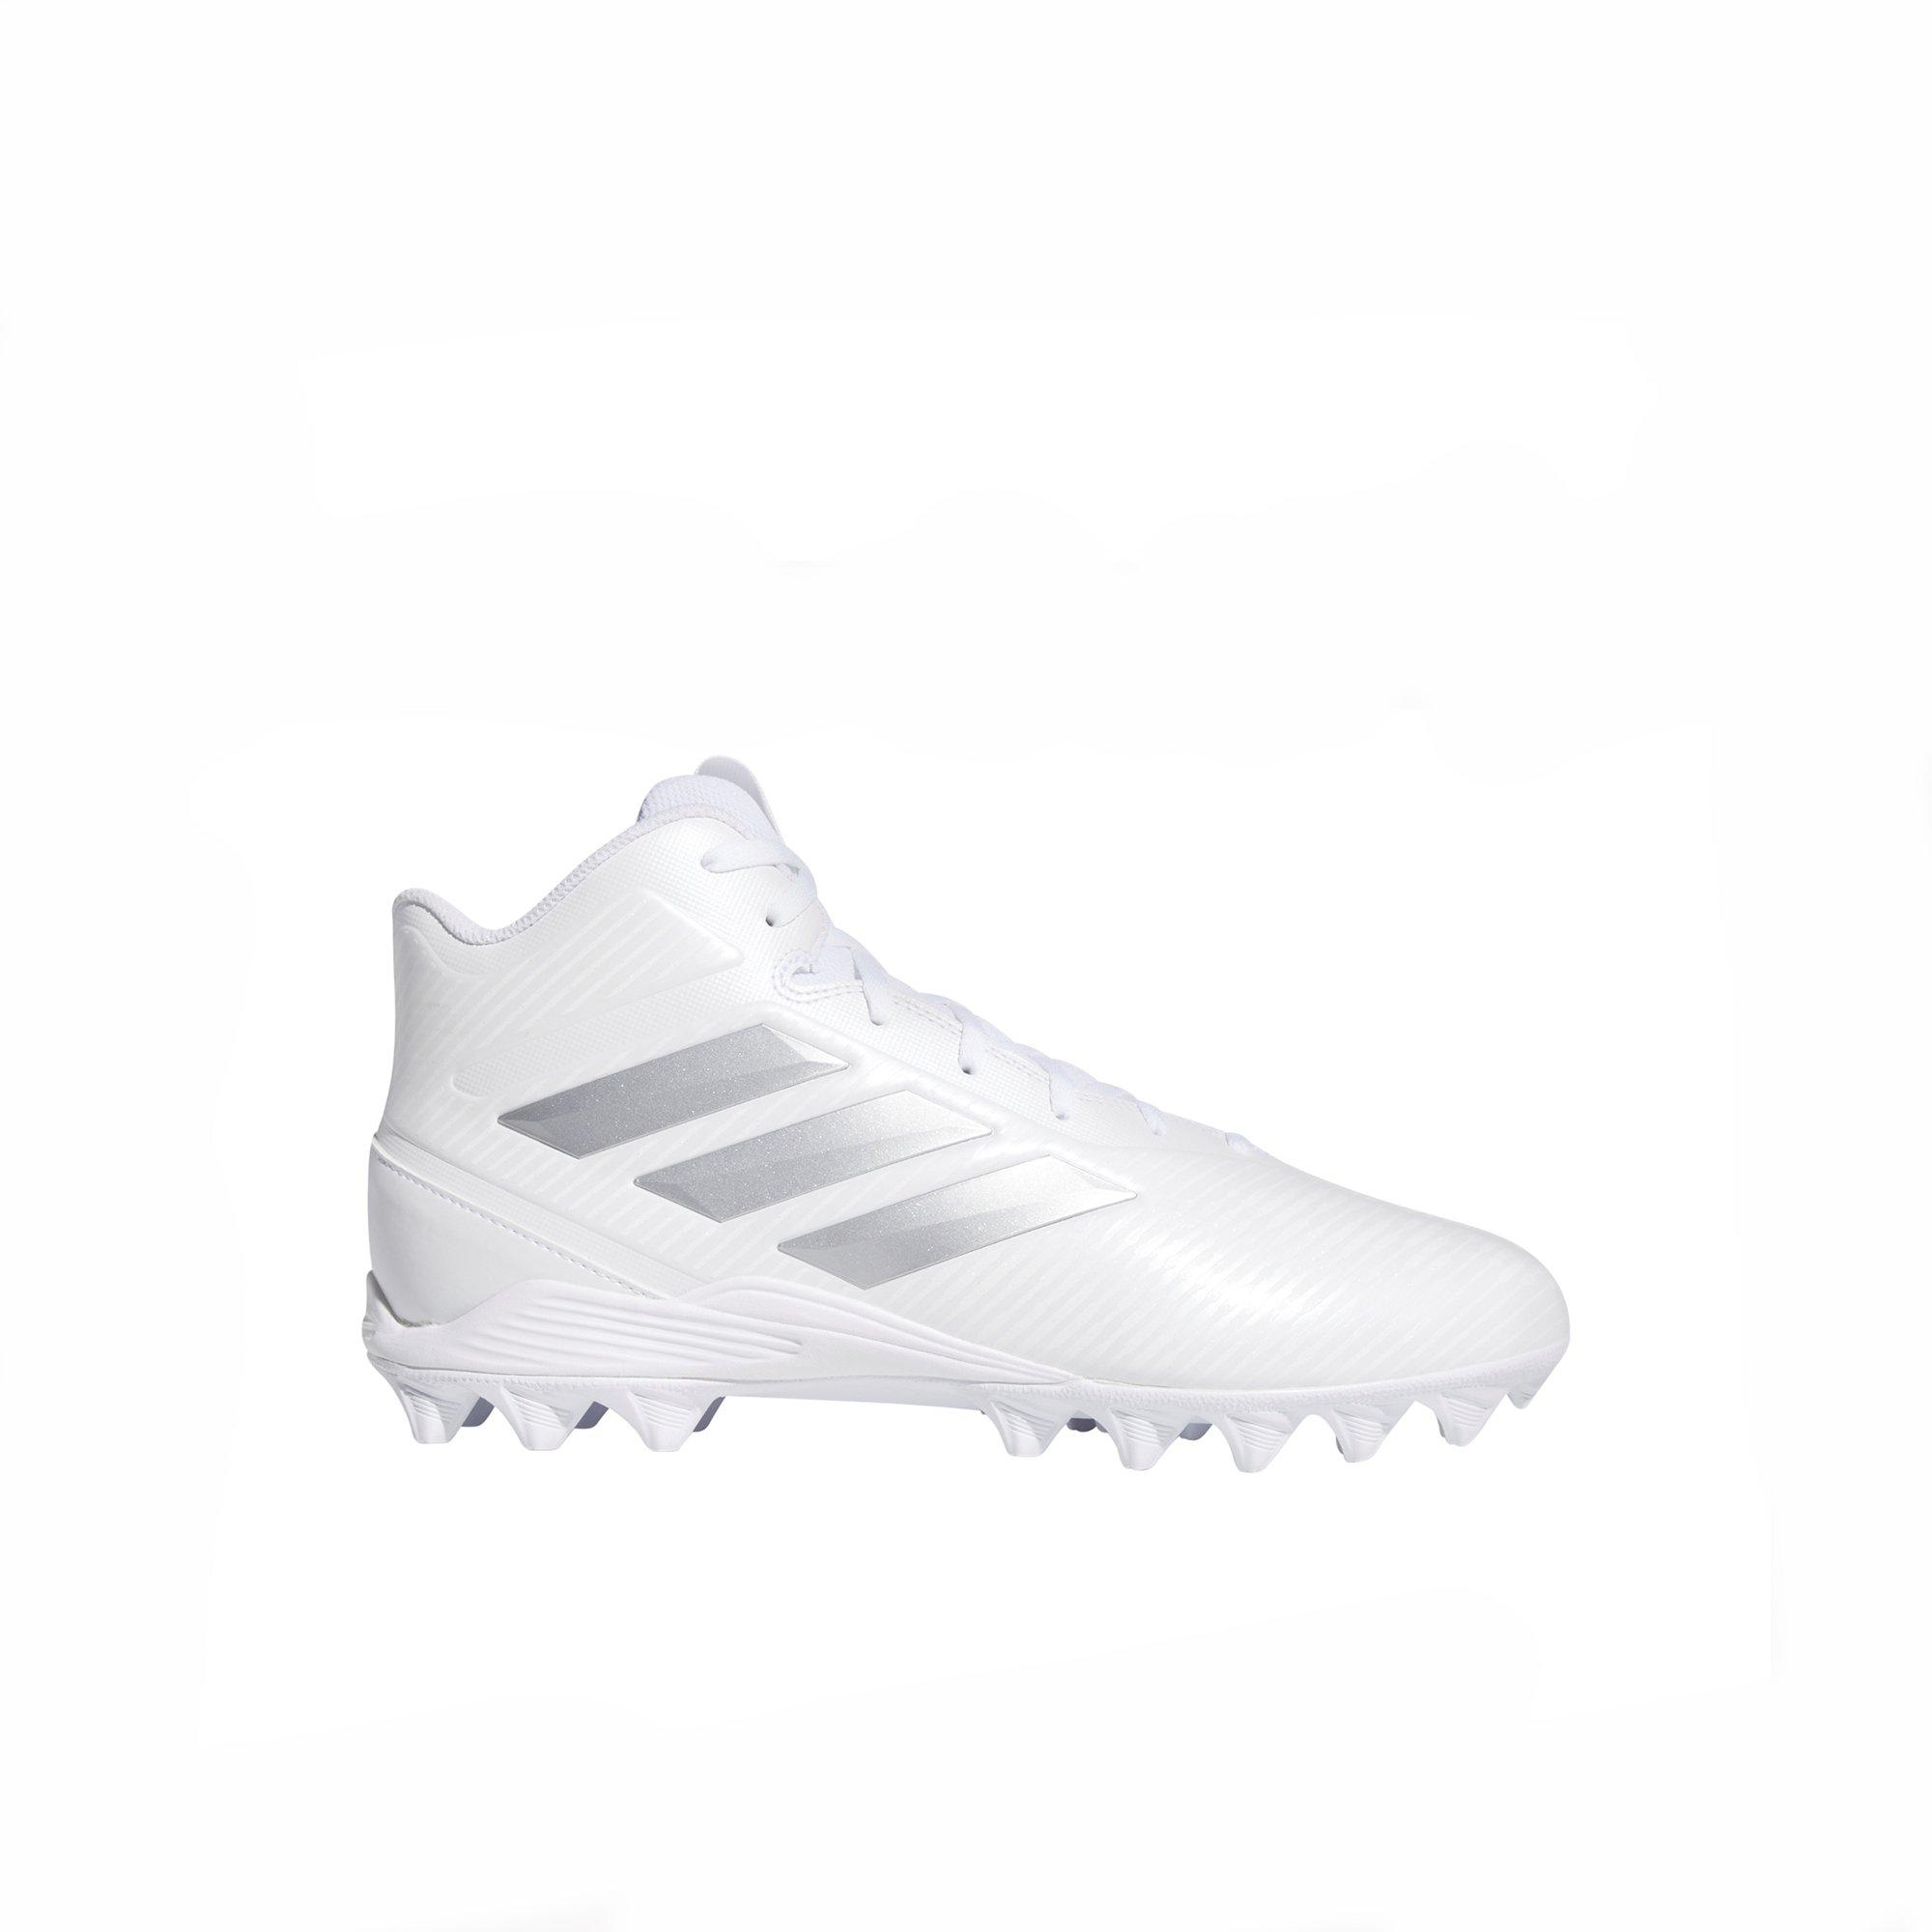 adidas mid top cleats